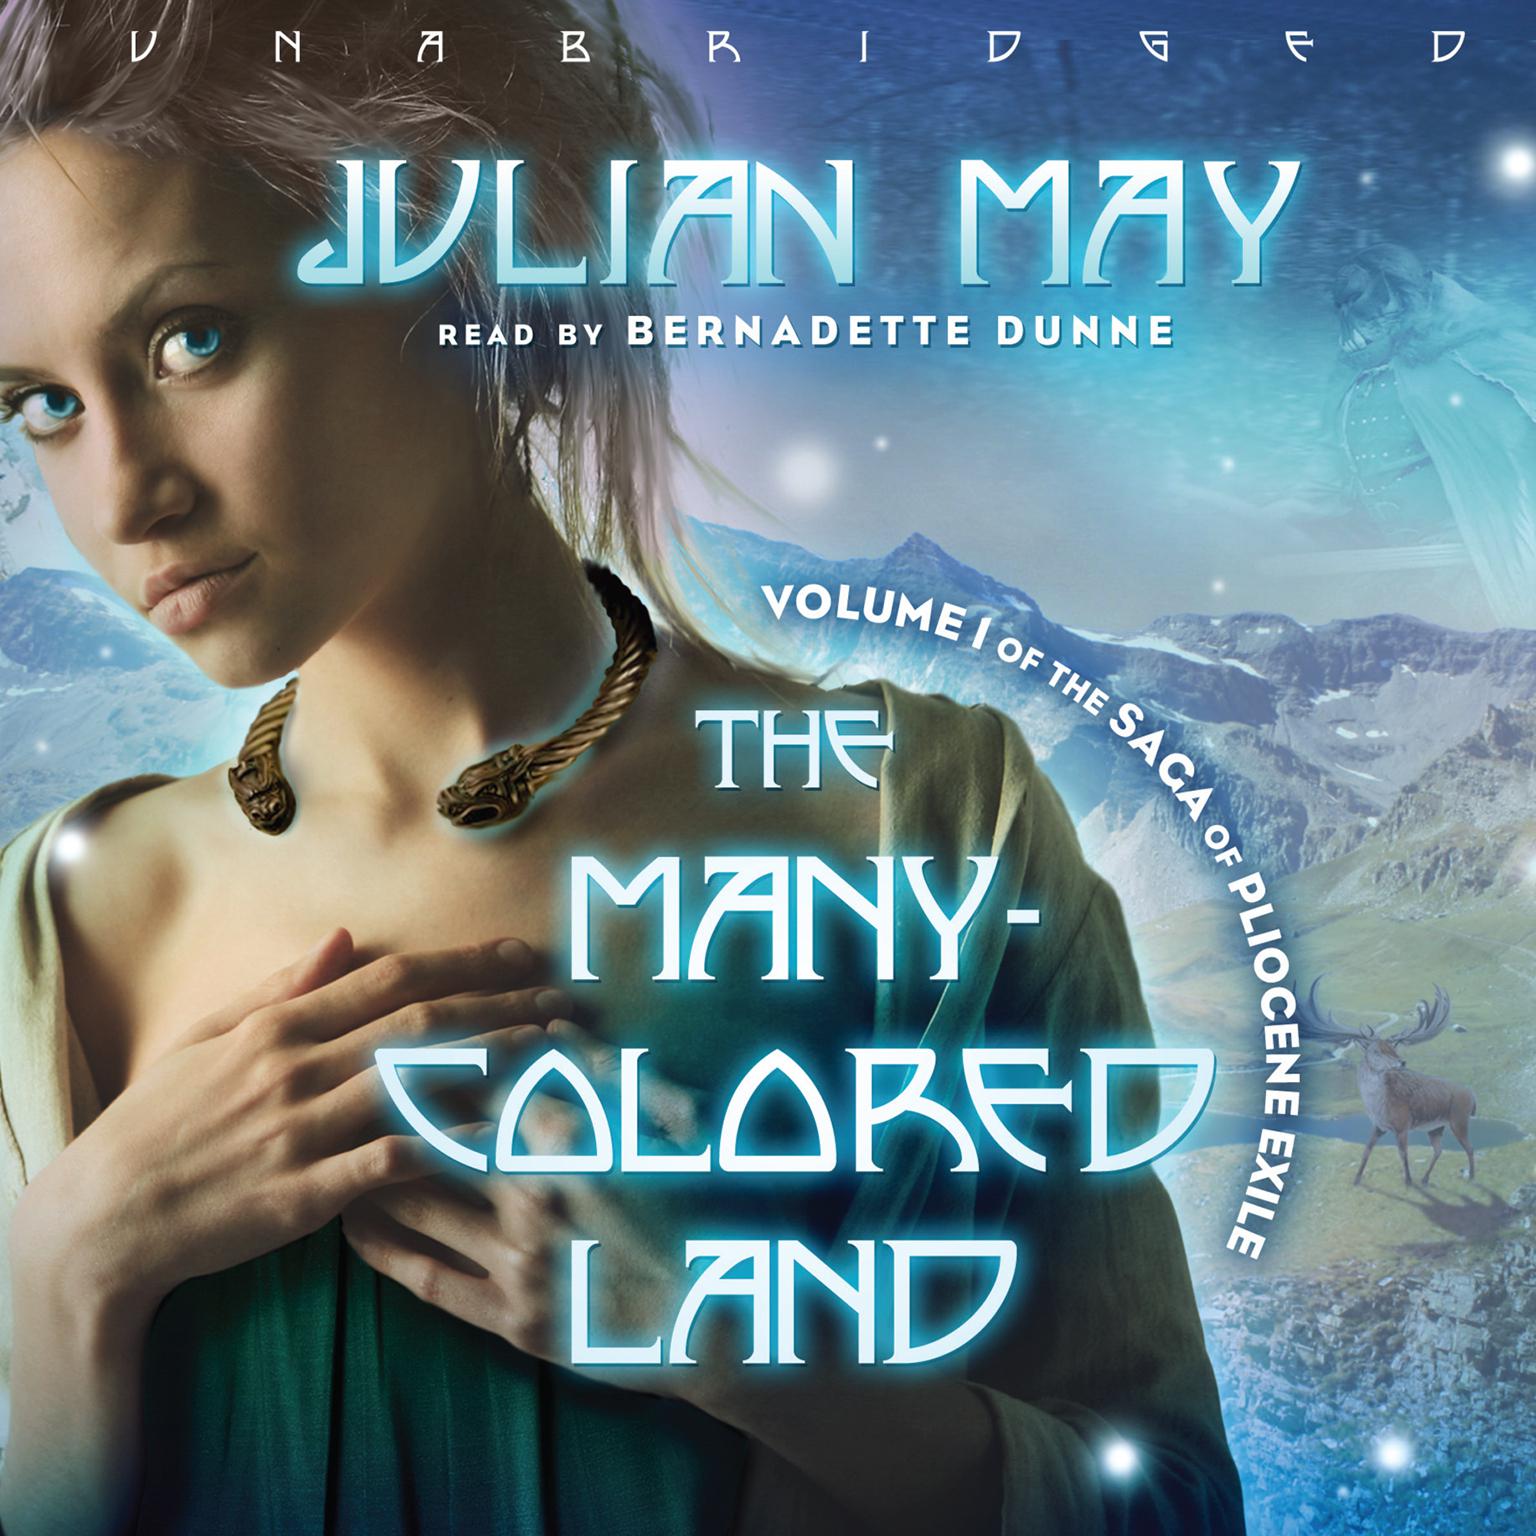 The Many-Colored Land: Volume 1 of the Saga of Pliocene Exile Audiobook, by Julian May